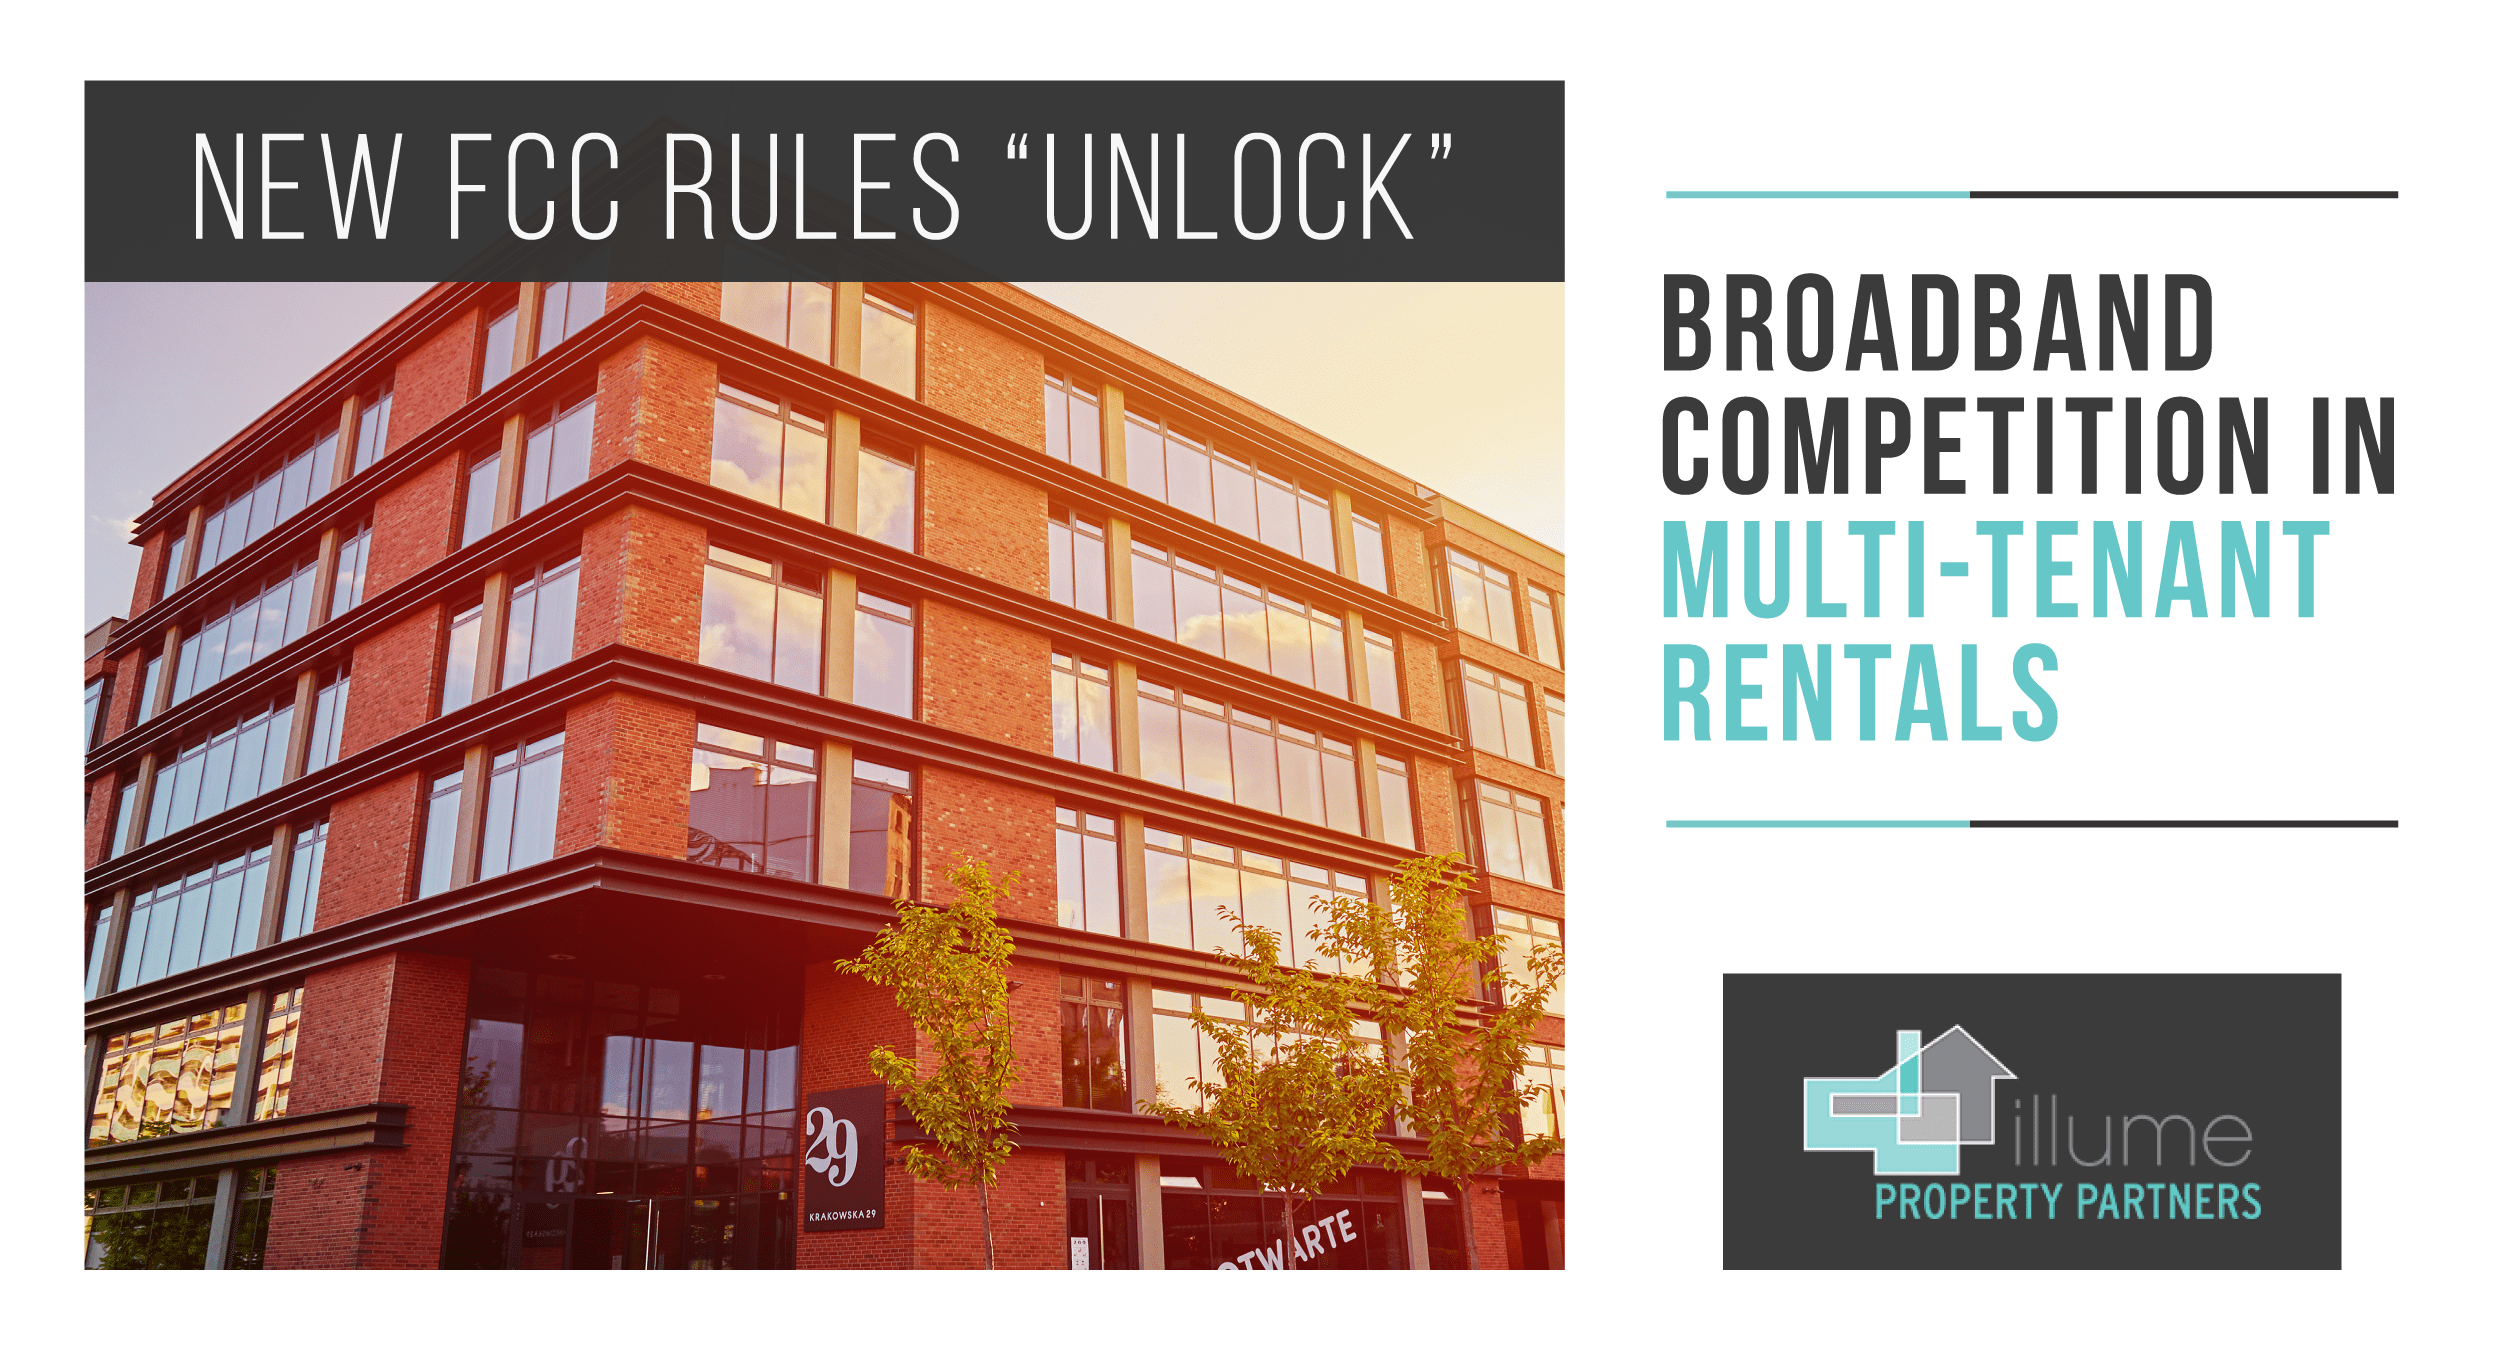 New FCC Rules “Unlock” Broadband Competition in Multi-Tenant Rentals